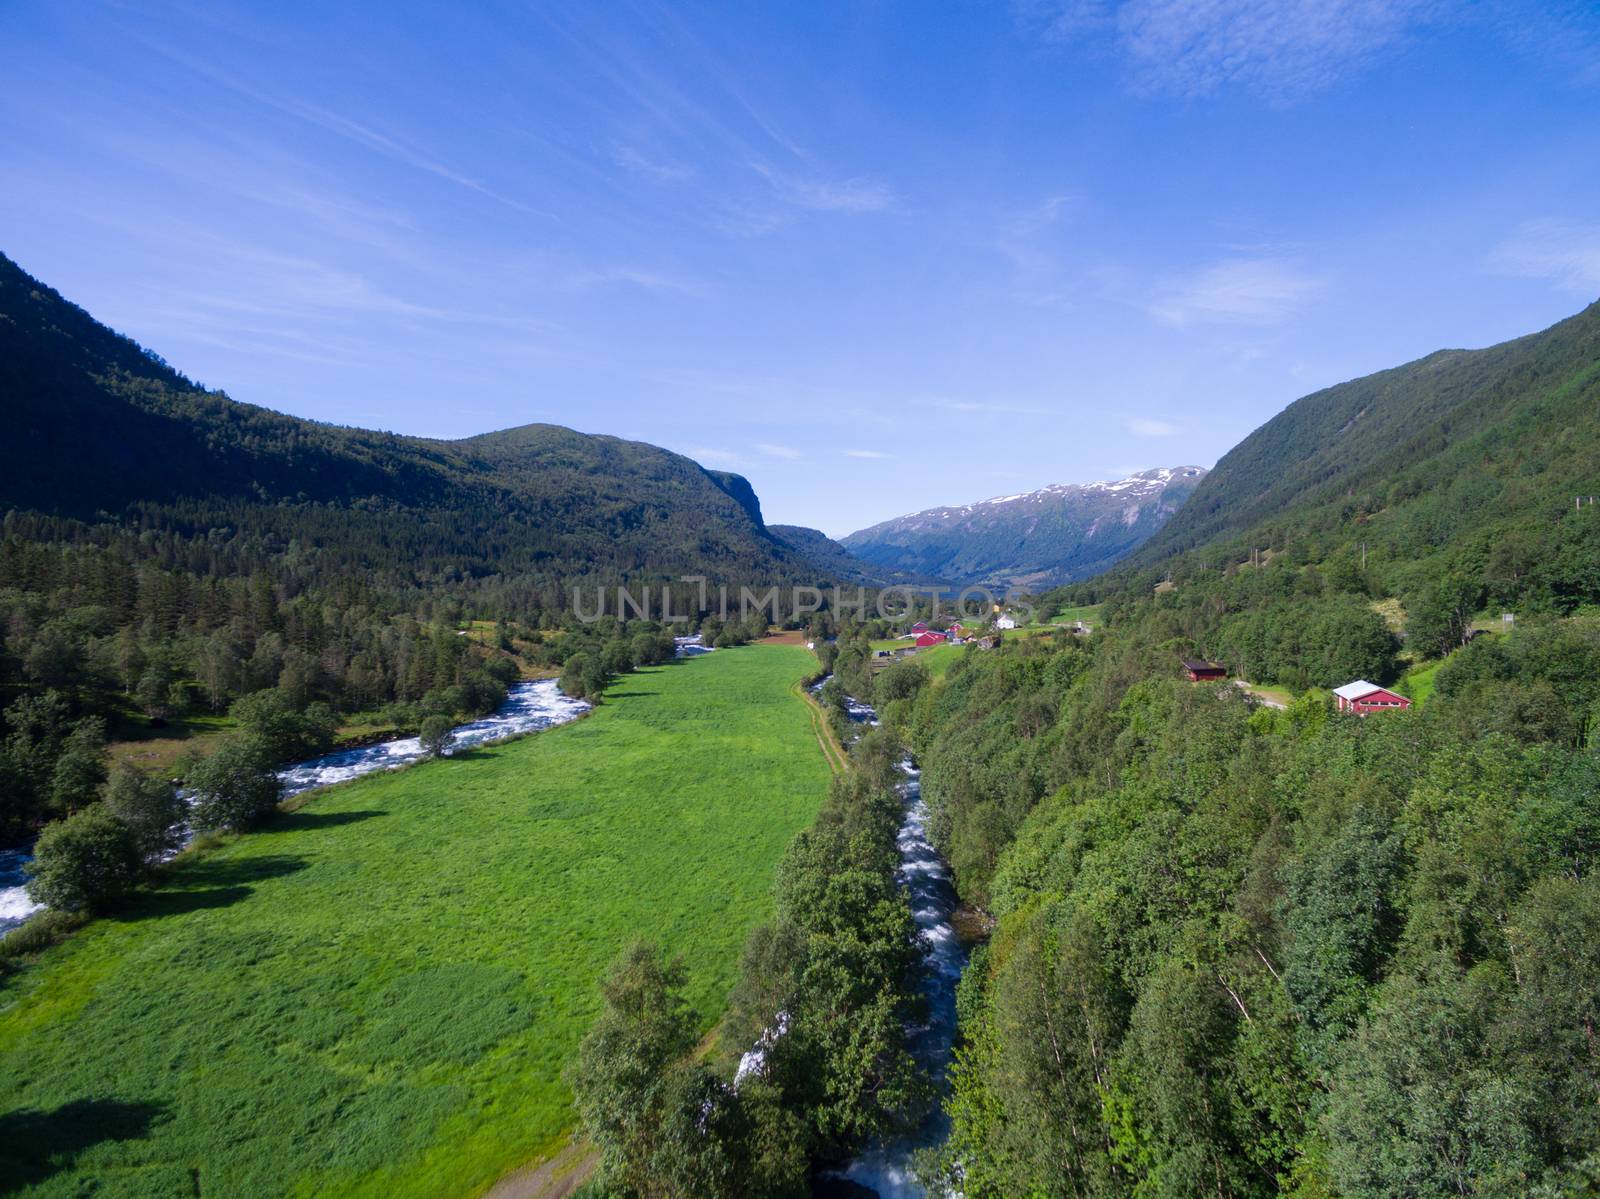 Scenic Norway by Harvepino